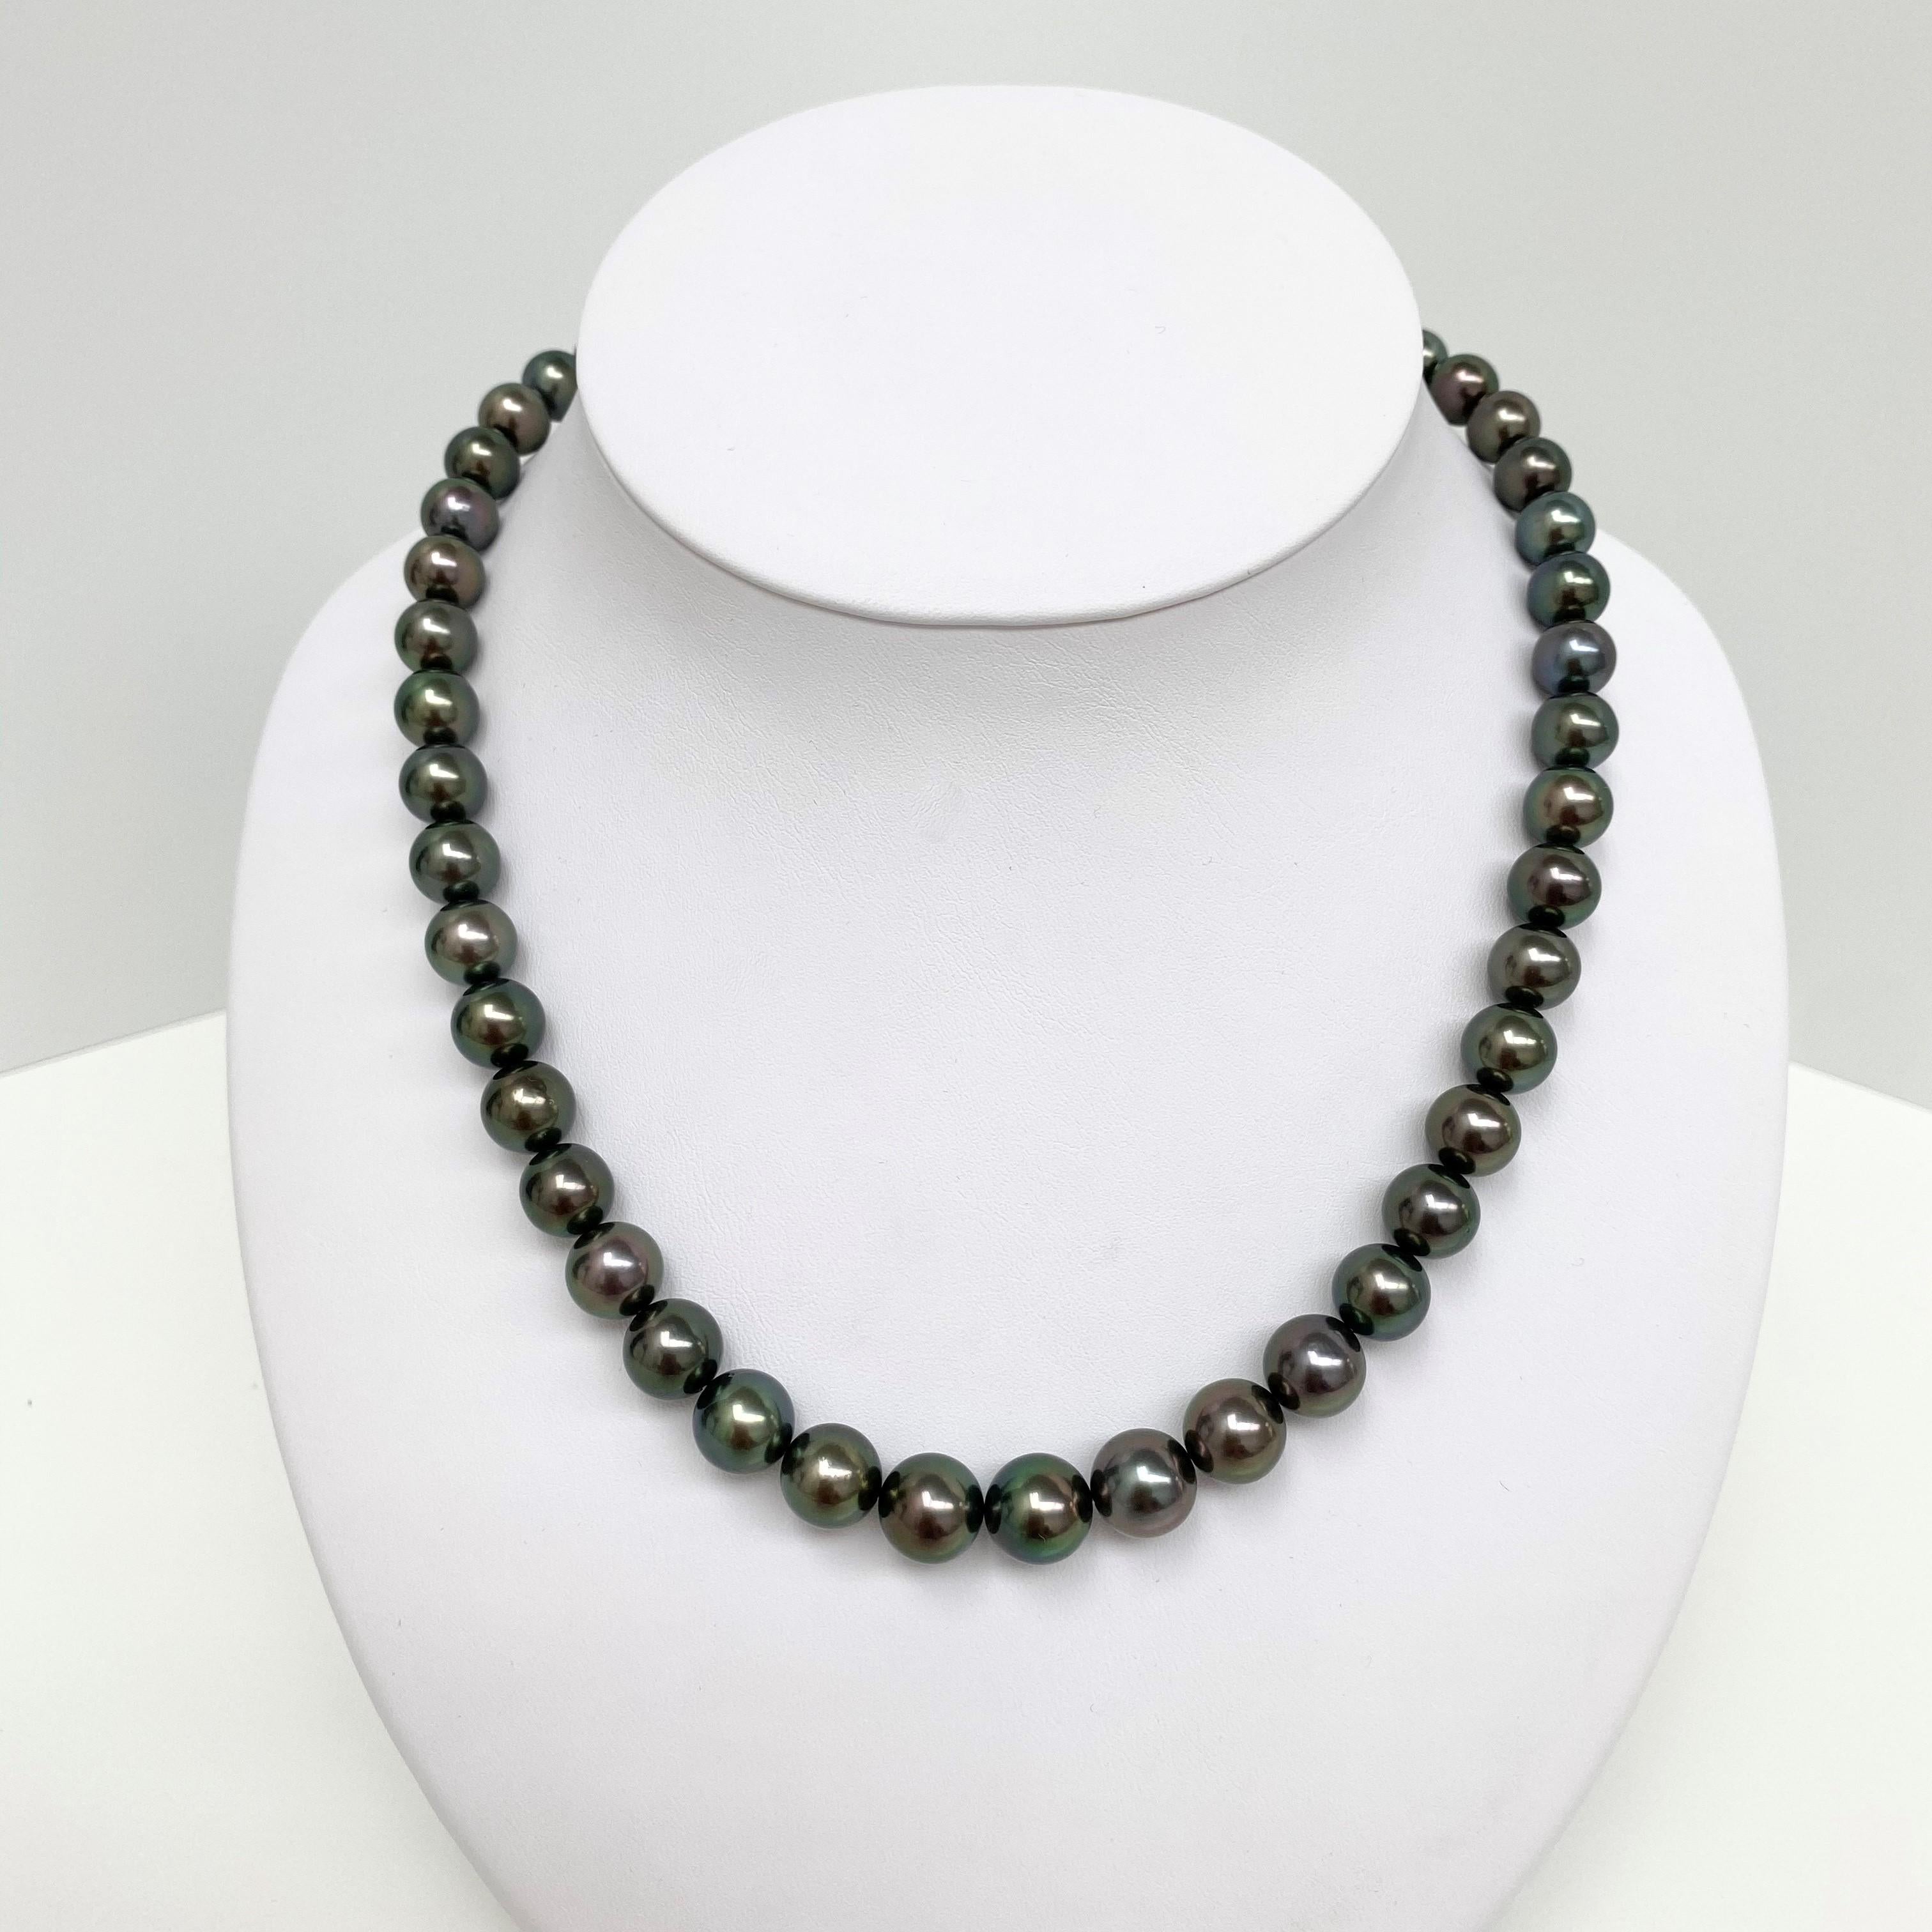 8-10mm Tahitian Dark Multicolor Round Pearl Necklace with Gold Clasp
AAAA Quality, Tahitian Dark Multicolor Peacock Round Pearl Necklace, 18 inches hand-knotted with gold fish-hook clasp #CP60
